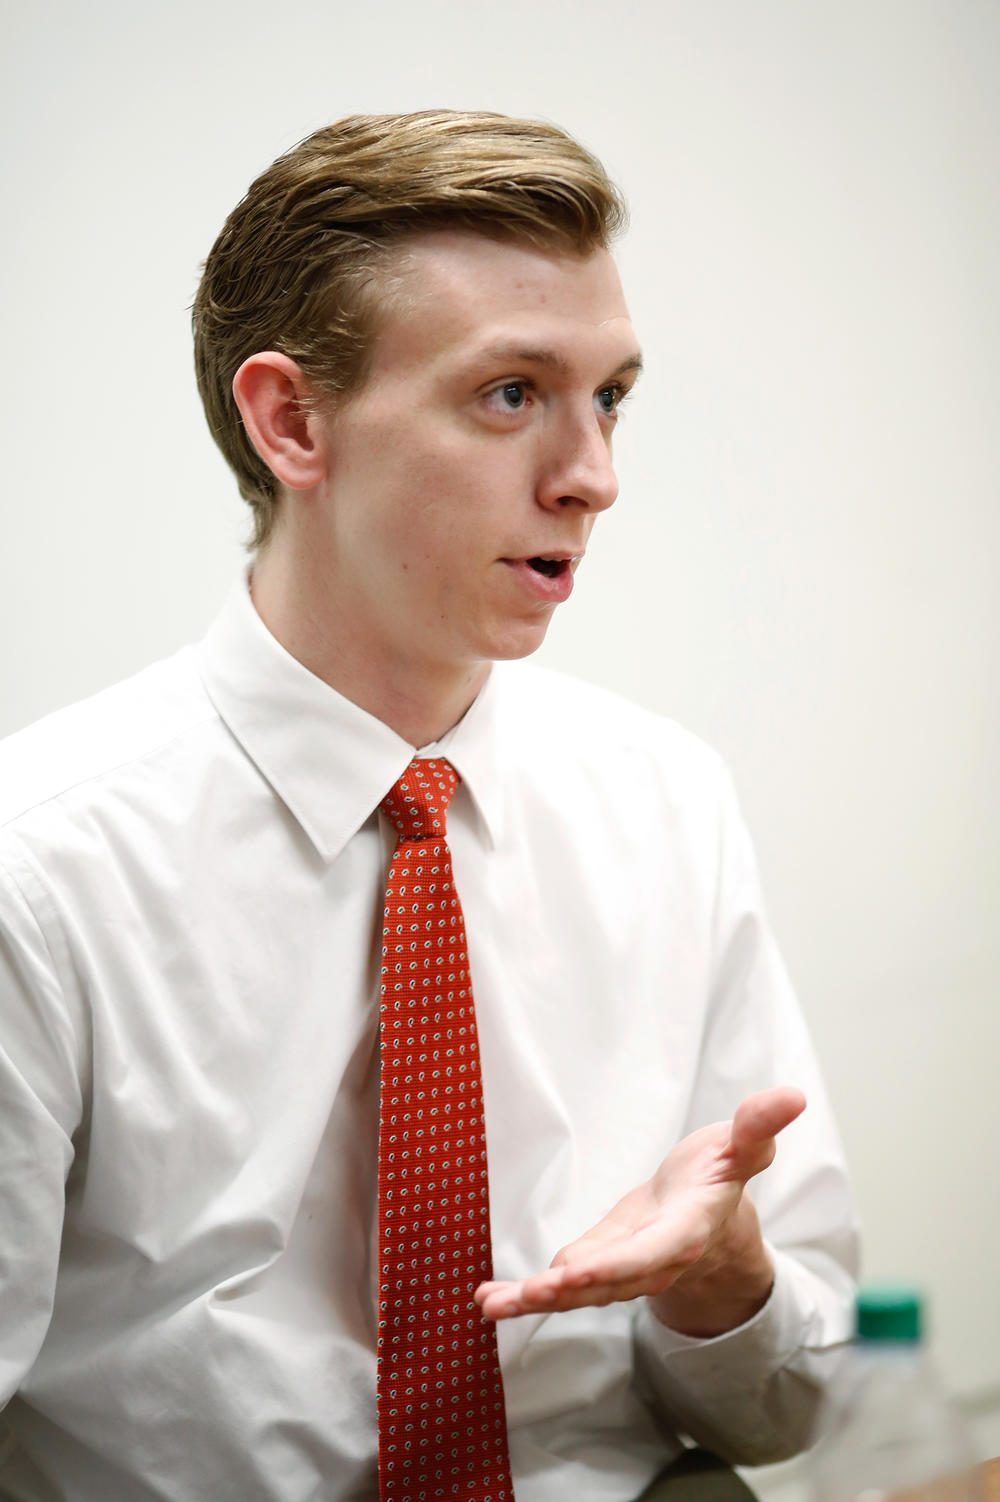 Bryson Hyman, 22, of Lillington, N.C., is a recent graduate of Campbell University outside Raleigh. As the 2024 contest gears up, he hopes politicians will focus on issues affecting rural Americans, particularly pocketbook issues.